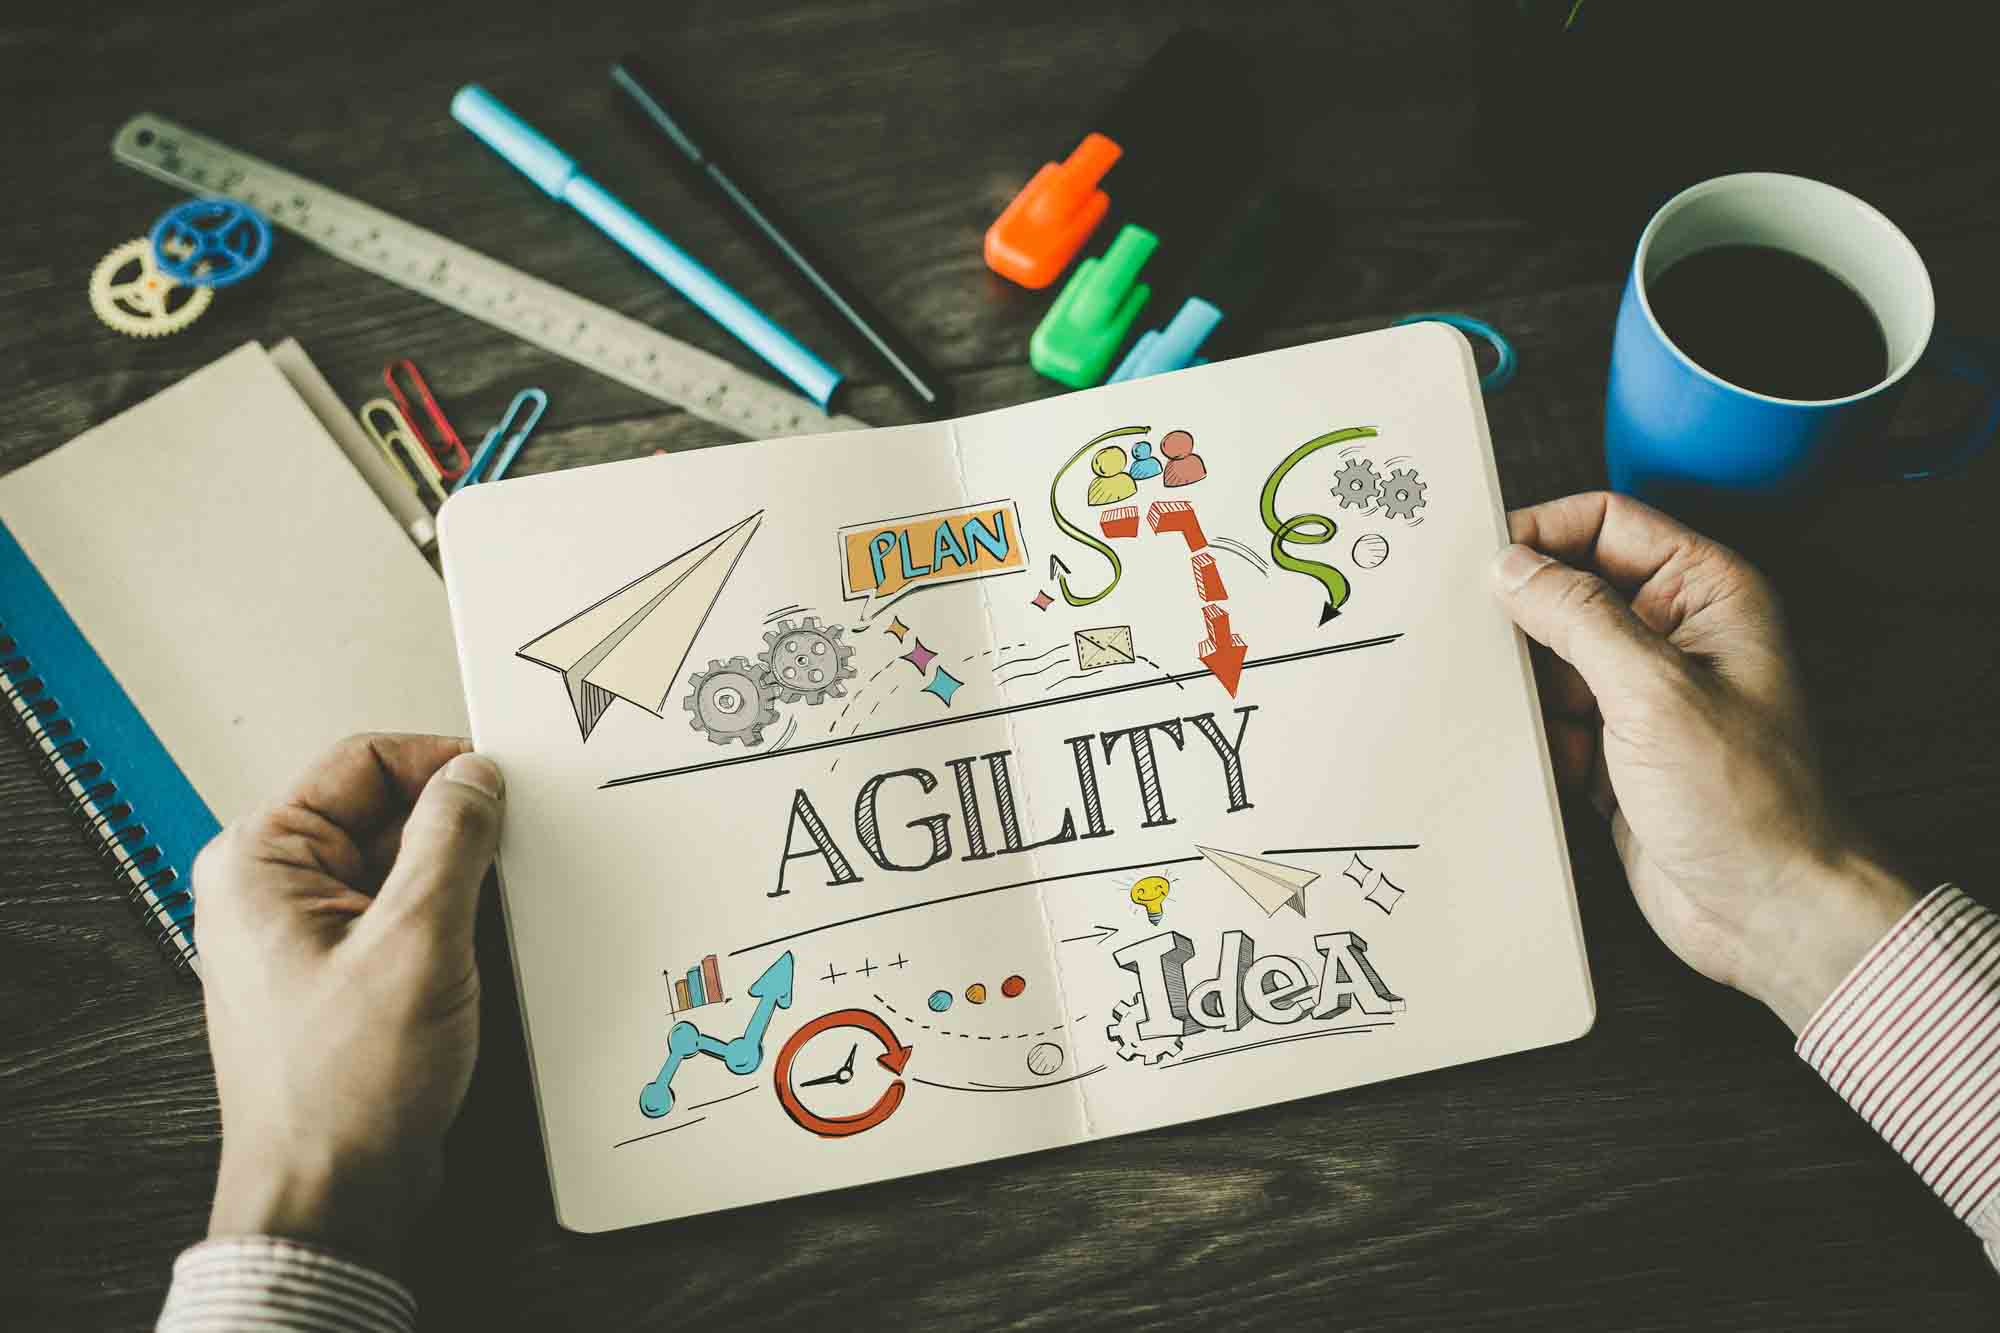 What Is Business Agility?